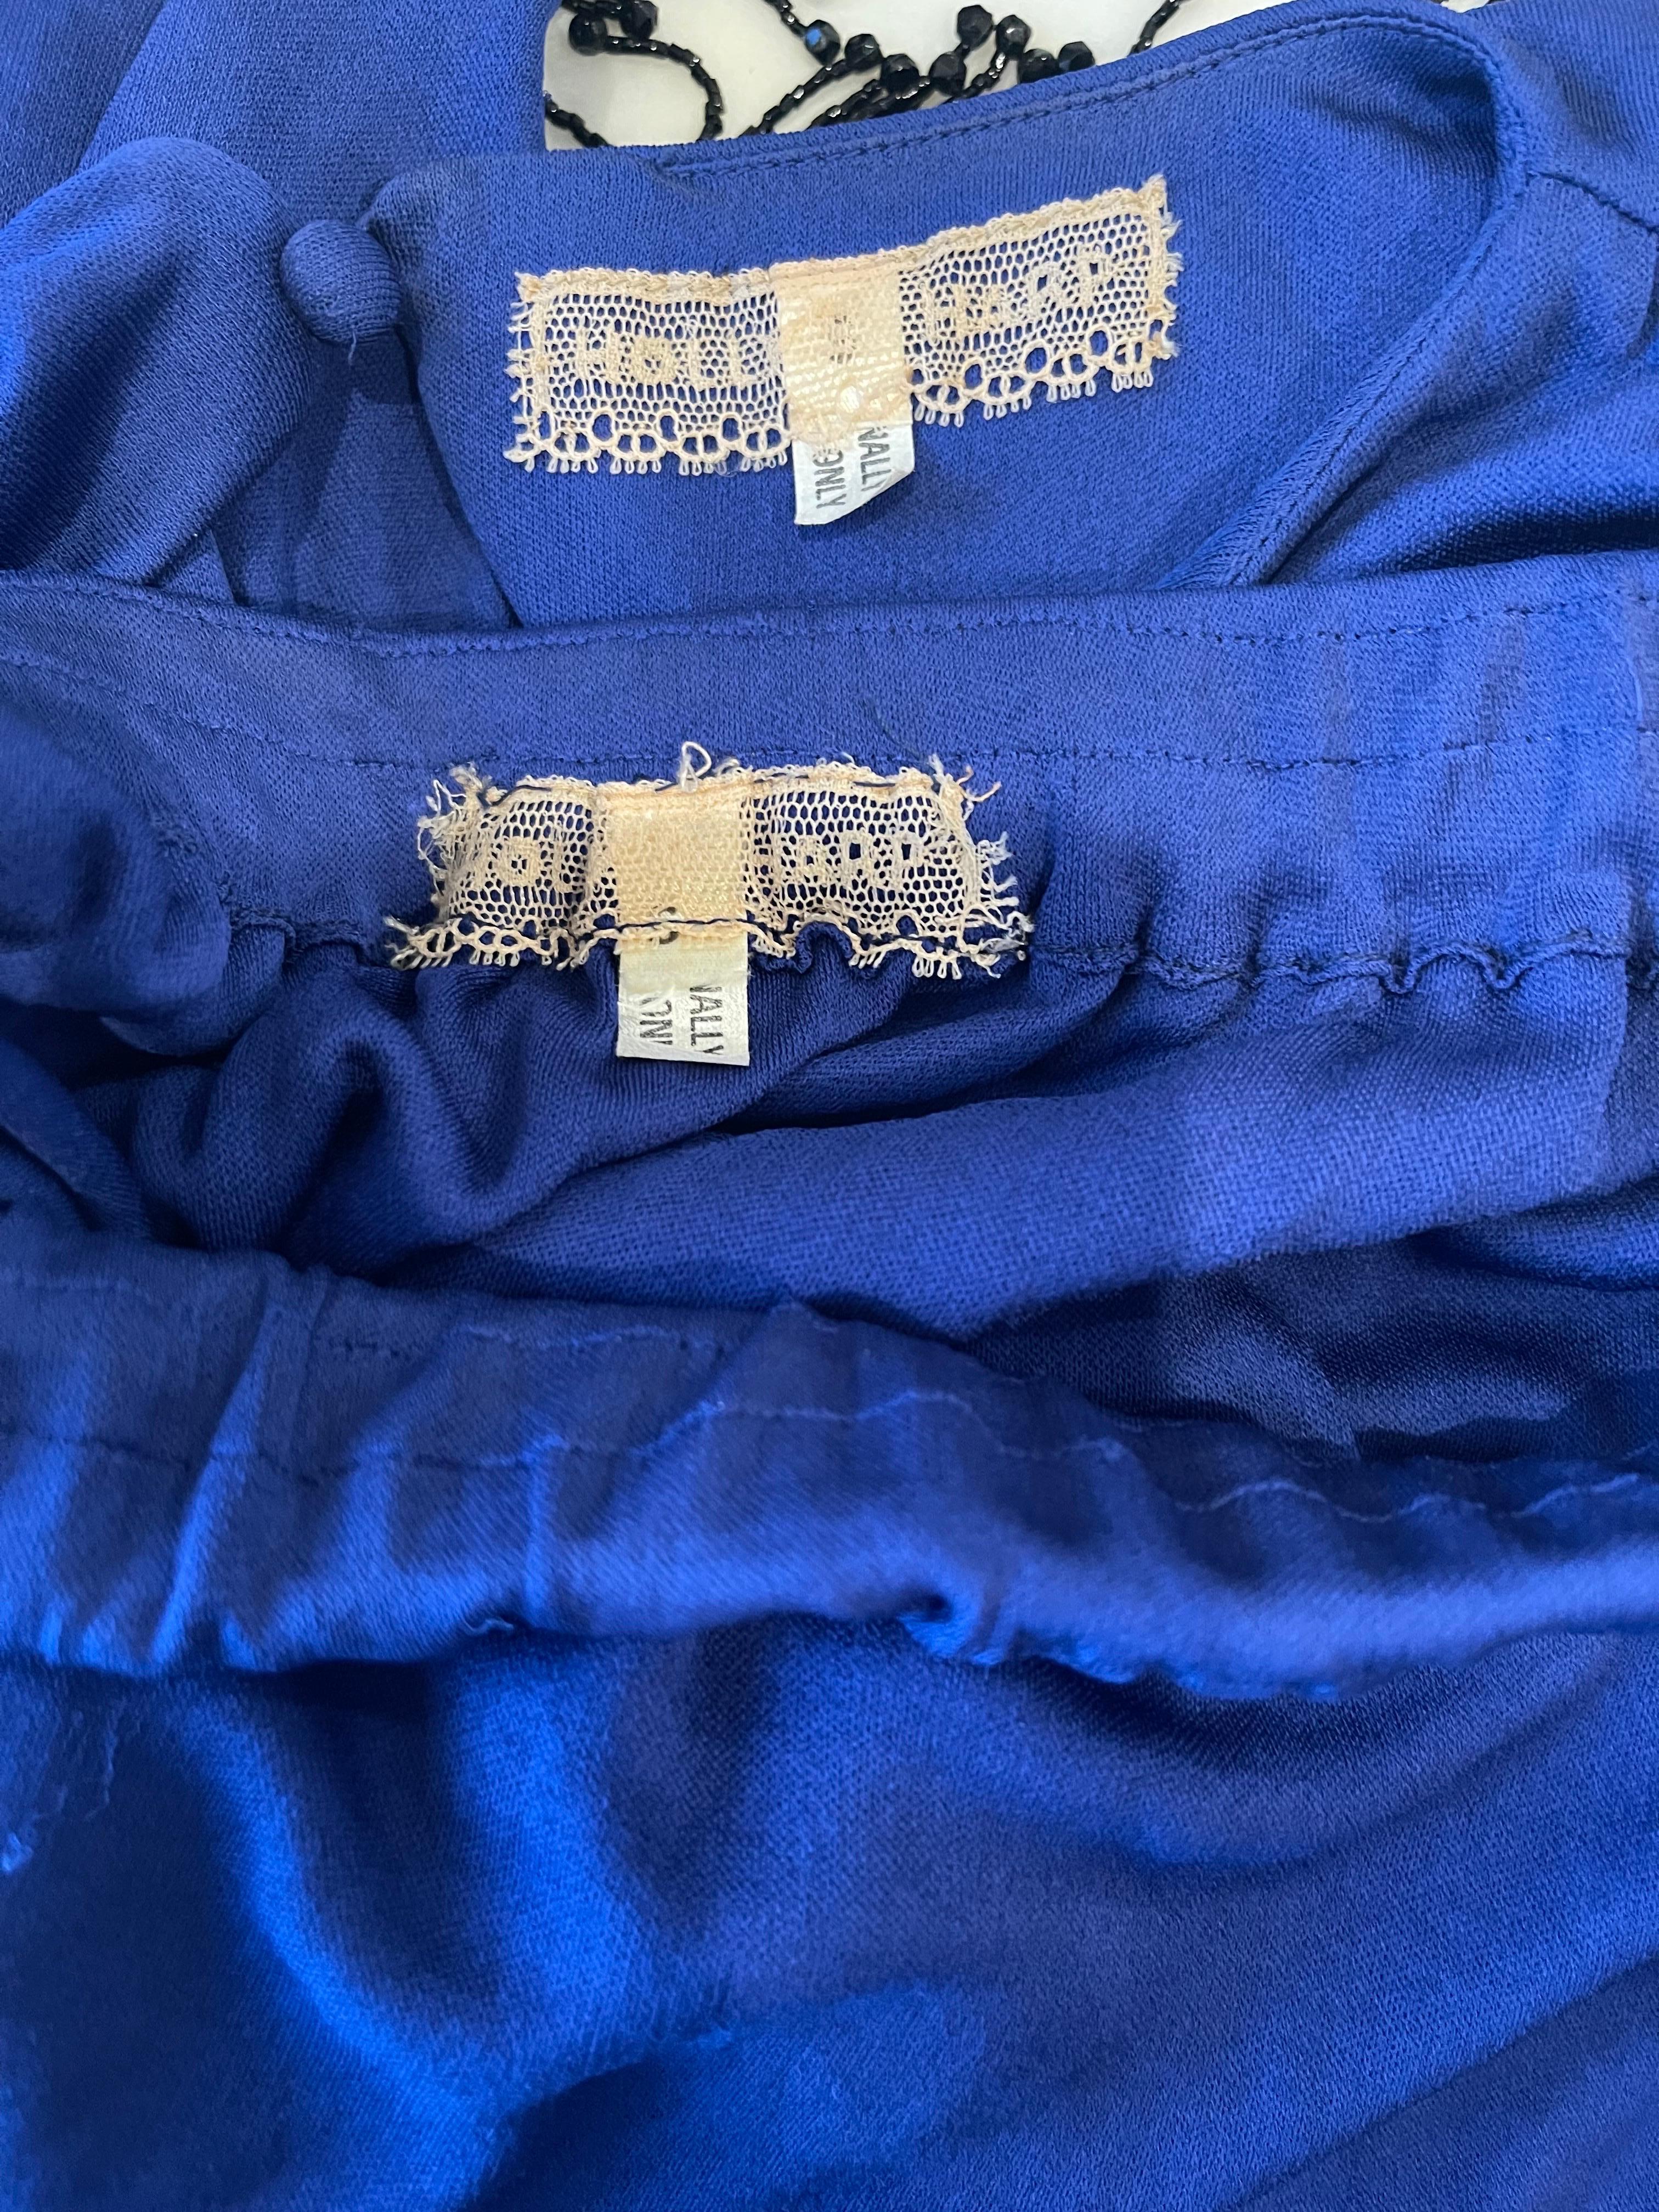 Beautiful vintage Holly’s Harp late 70s (Spring 1978) royal blue silk jersey 3 piece ensemble! Crop top simply sips over the head, has a elastic waistband, and a single button closure at back neck. Full length skirt has an elastic waistband.